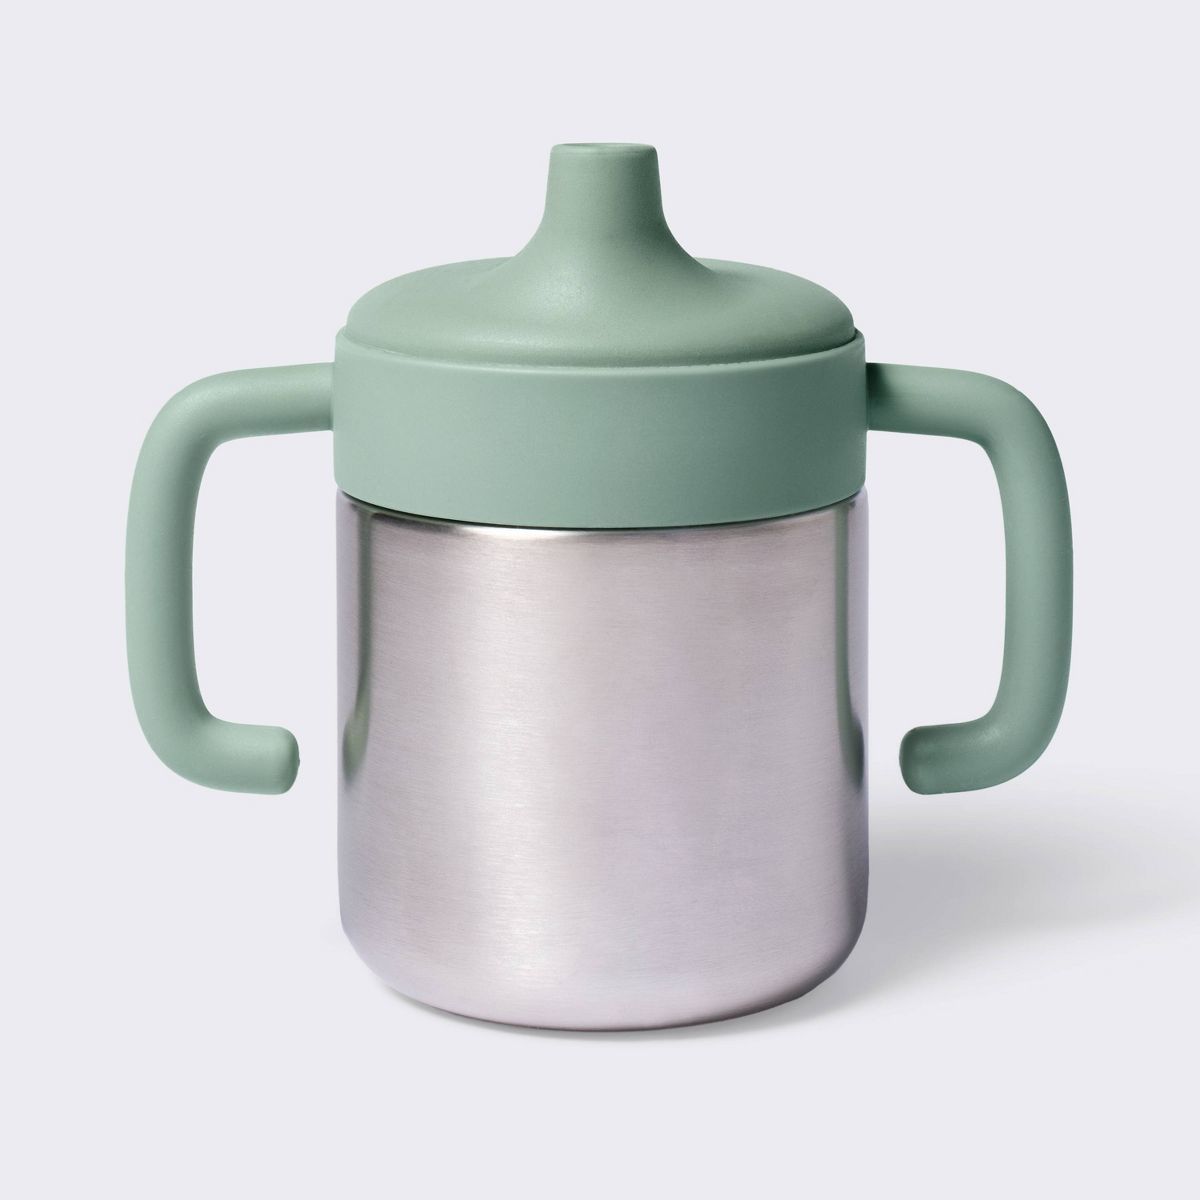 8oz Stainless Steel Sippy Cup - Green - Cloud Island™ | Target